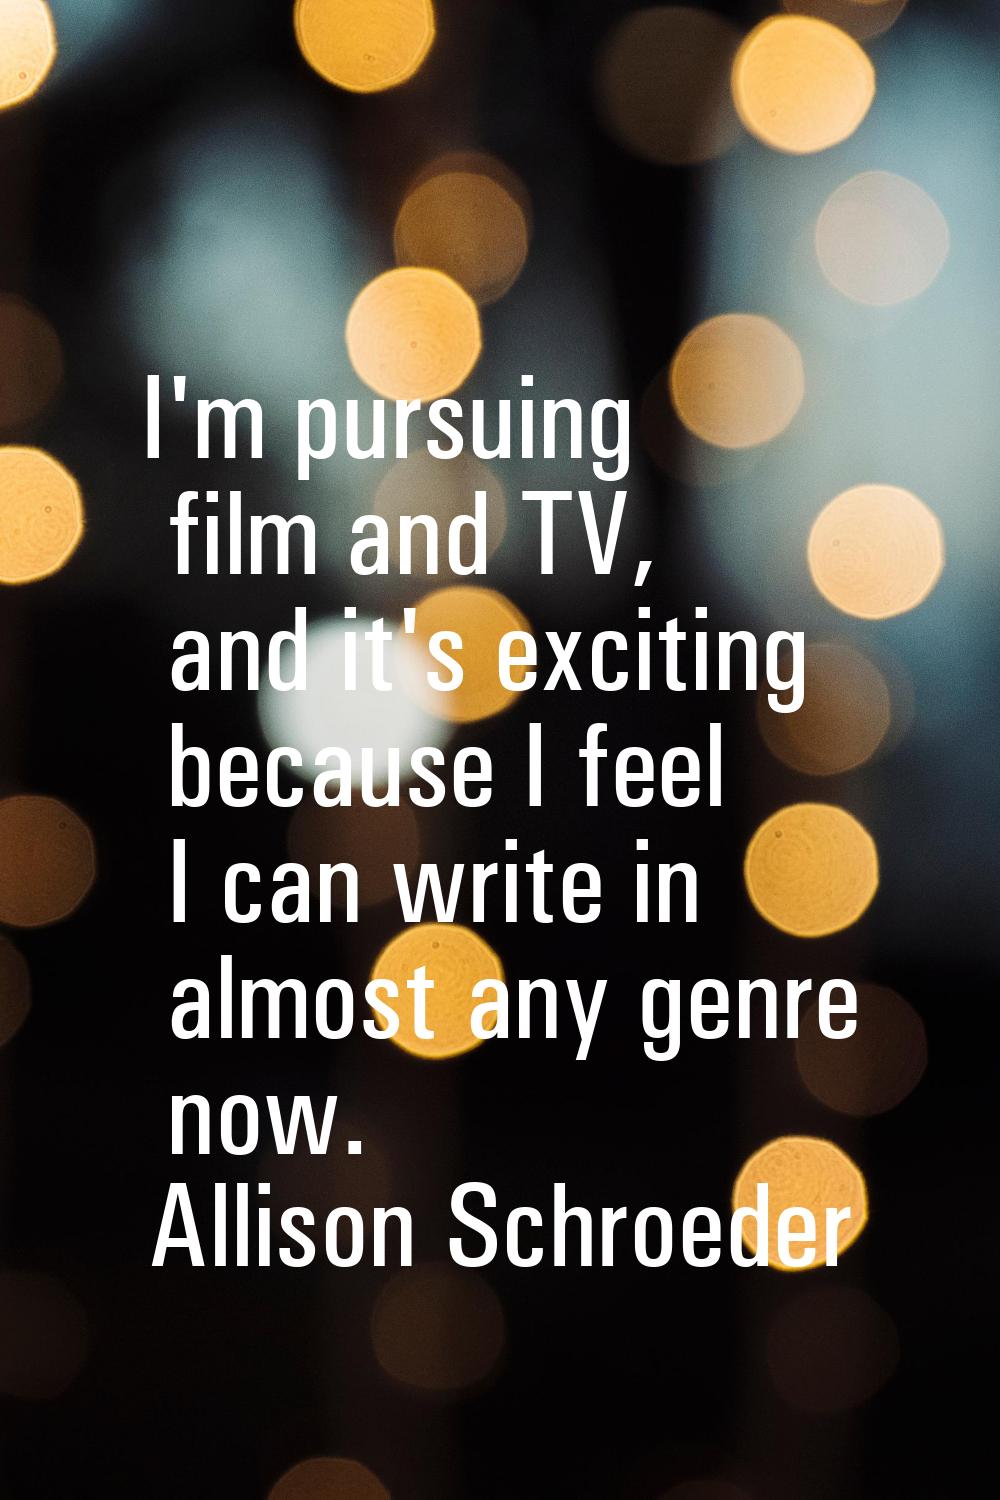 I'm pursuing film and TV, and it's exciting because I feel I can write in almost any genre now.